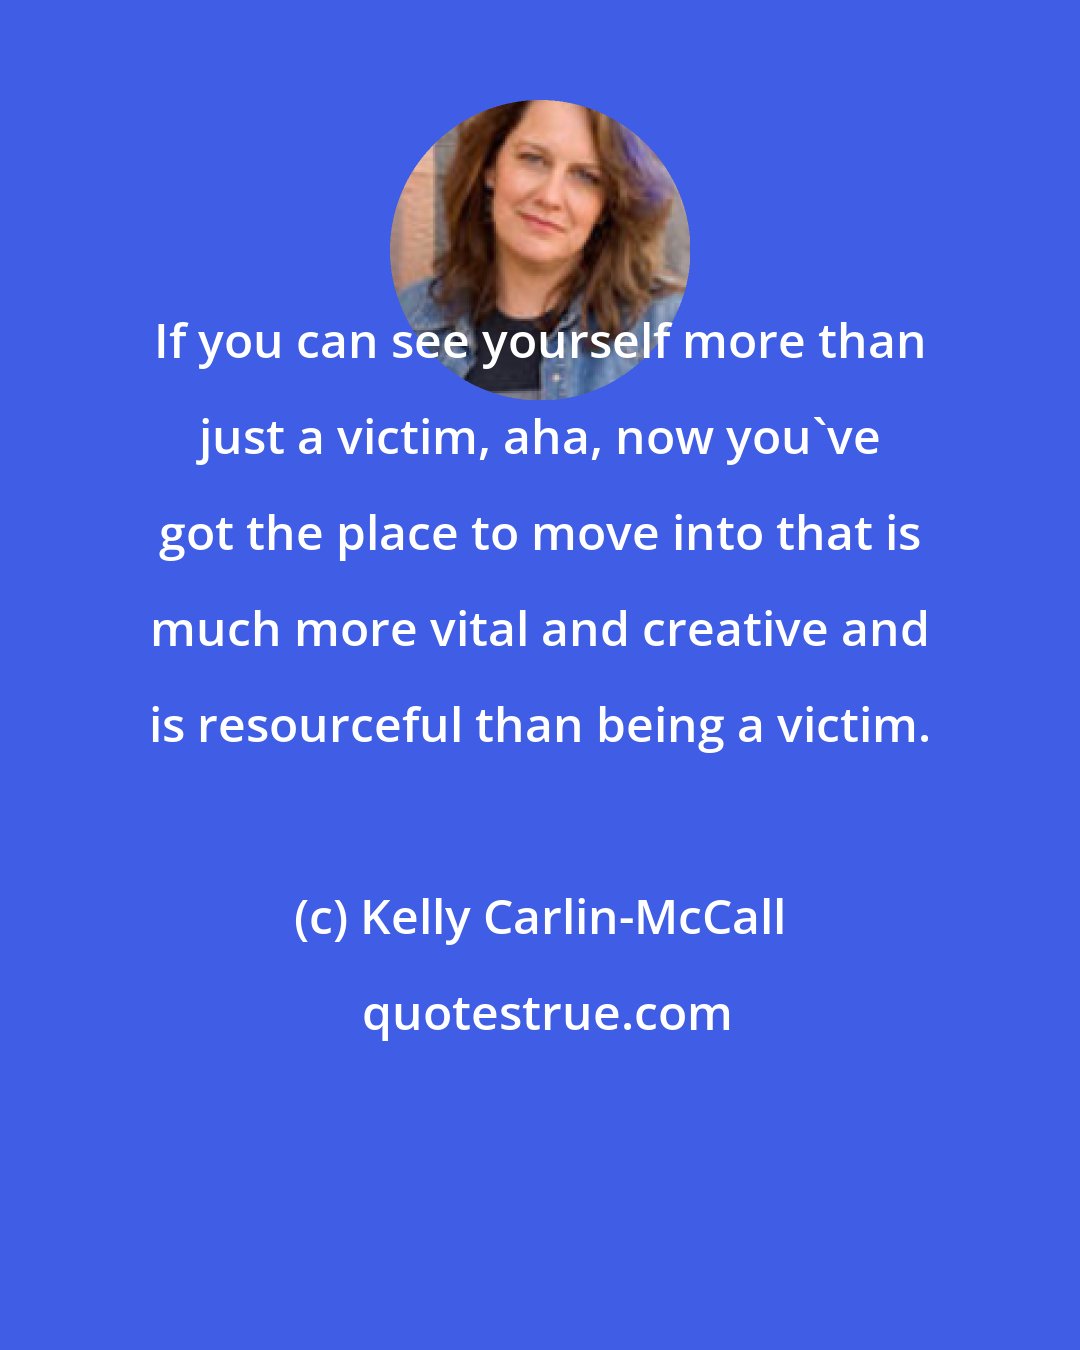 Kelly Carlin-McCall: If you can see yourself more than just a victim, aha, now you've got the place to move into that is much more vital and creative and is resourceful than being a victim.